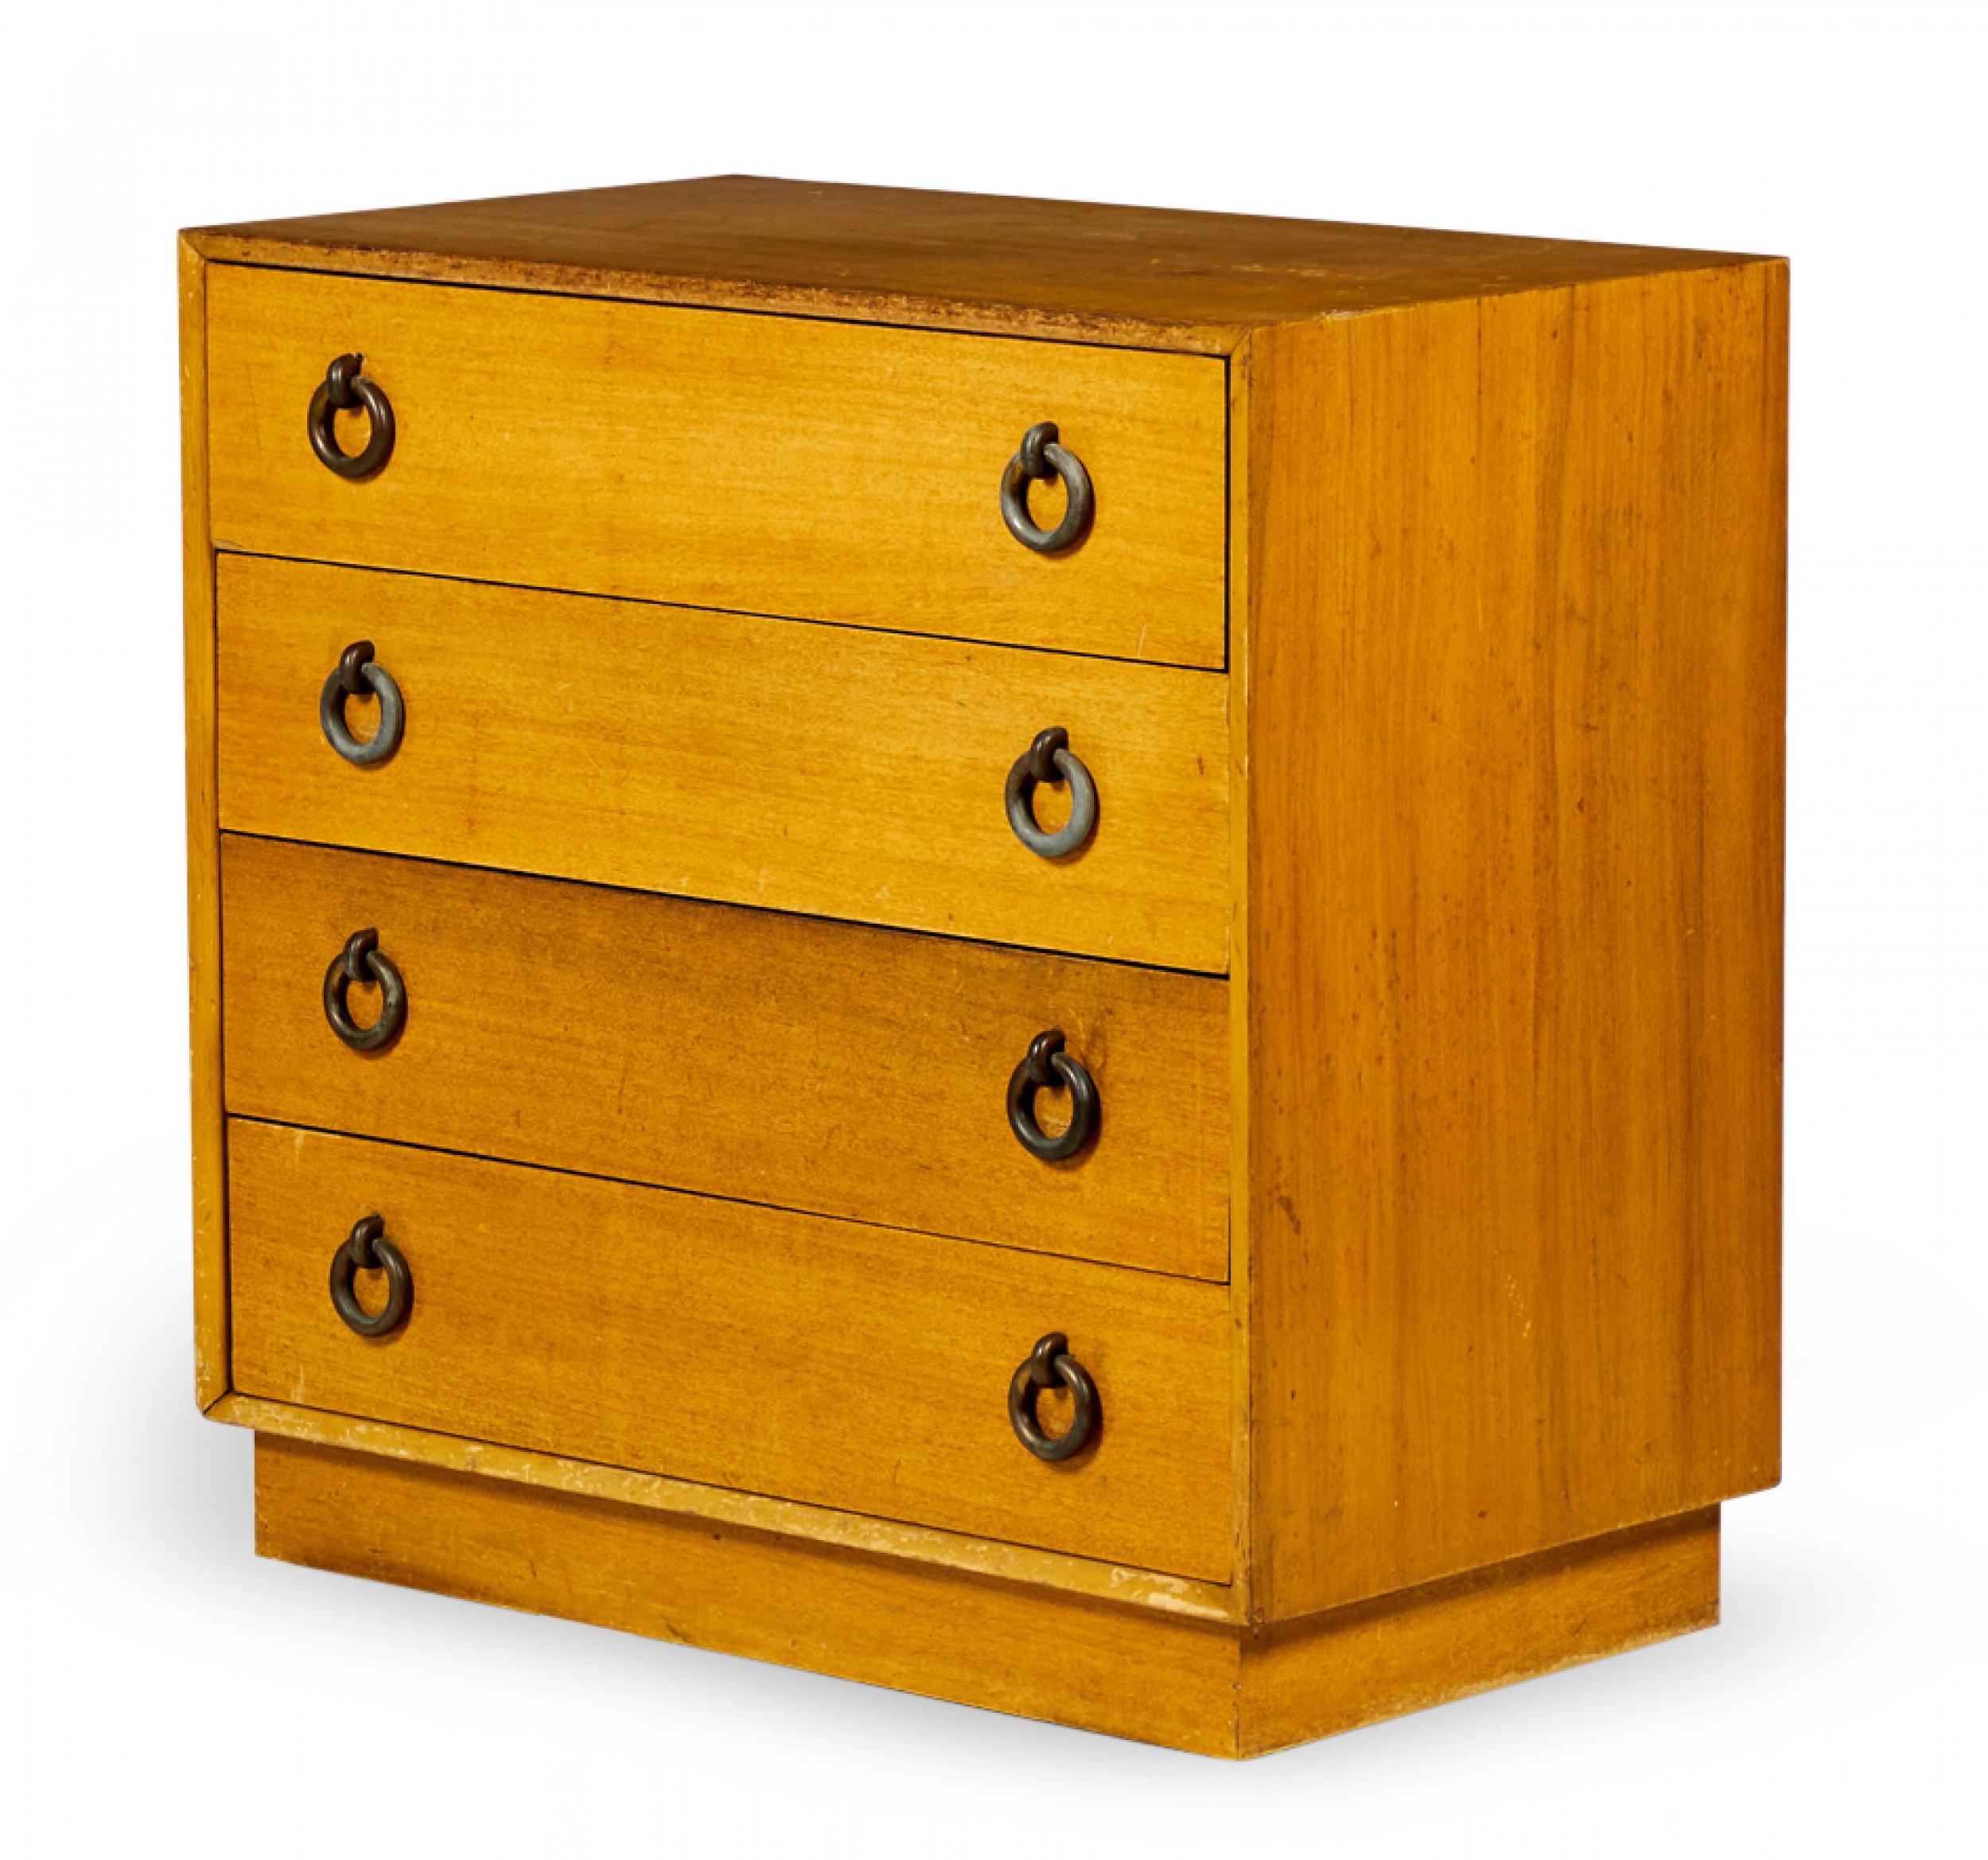 PAIR of American Mid-Century walnut chests with four drawers with two brass ring drawer pulls each.